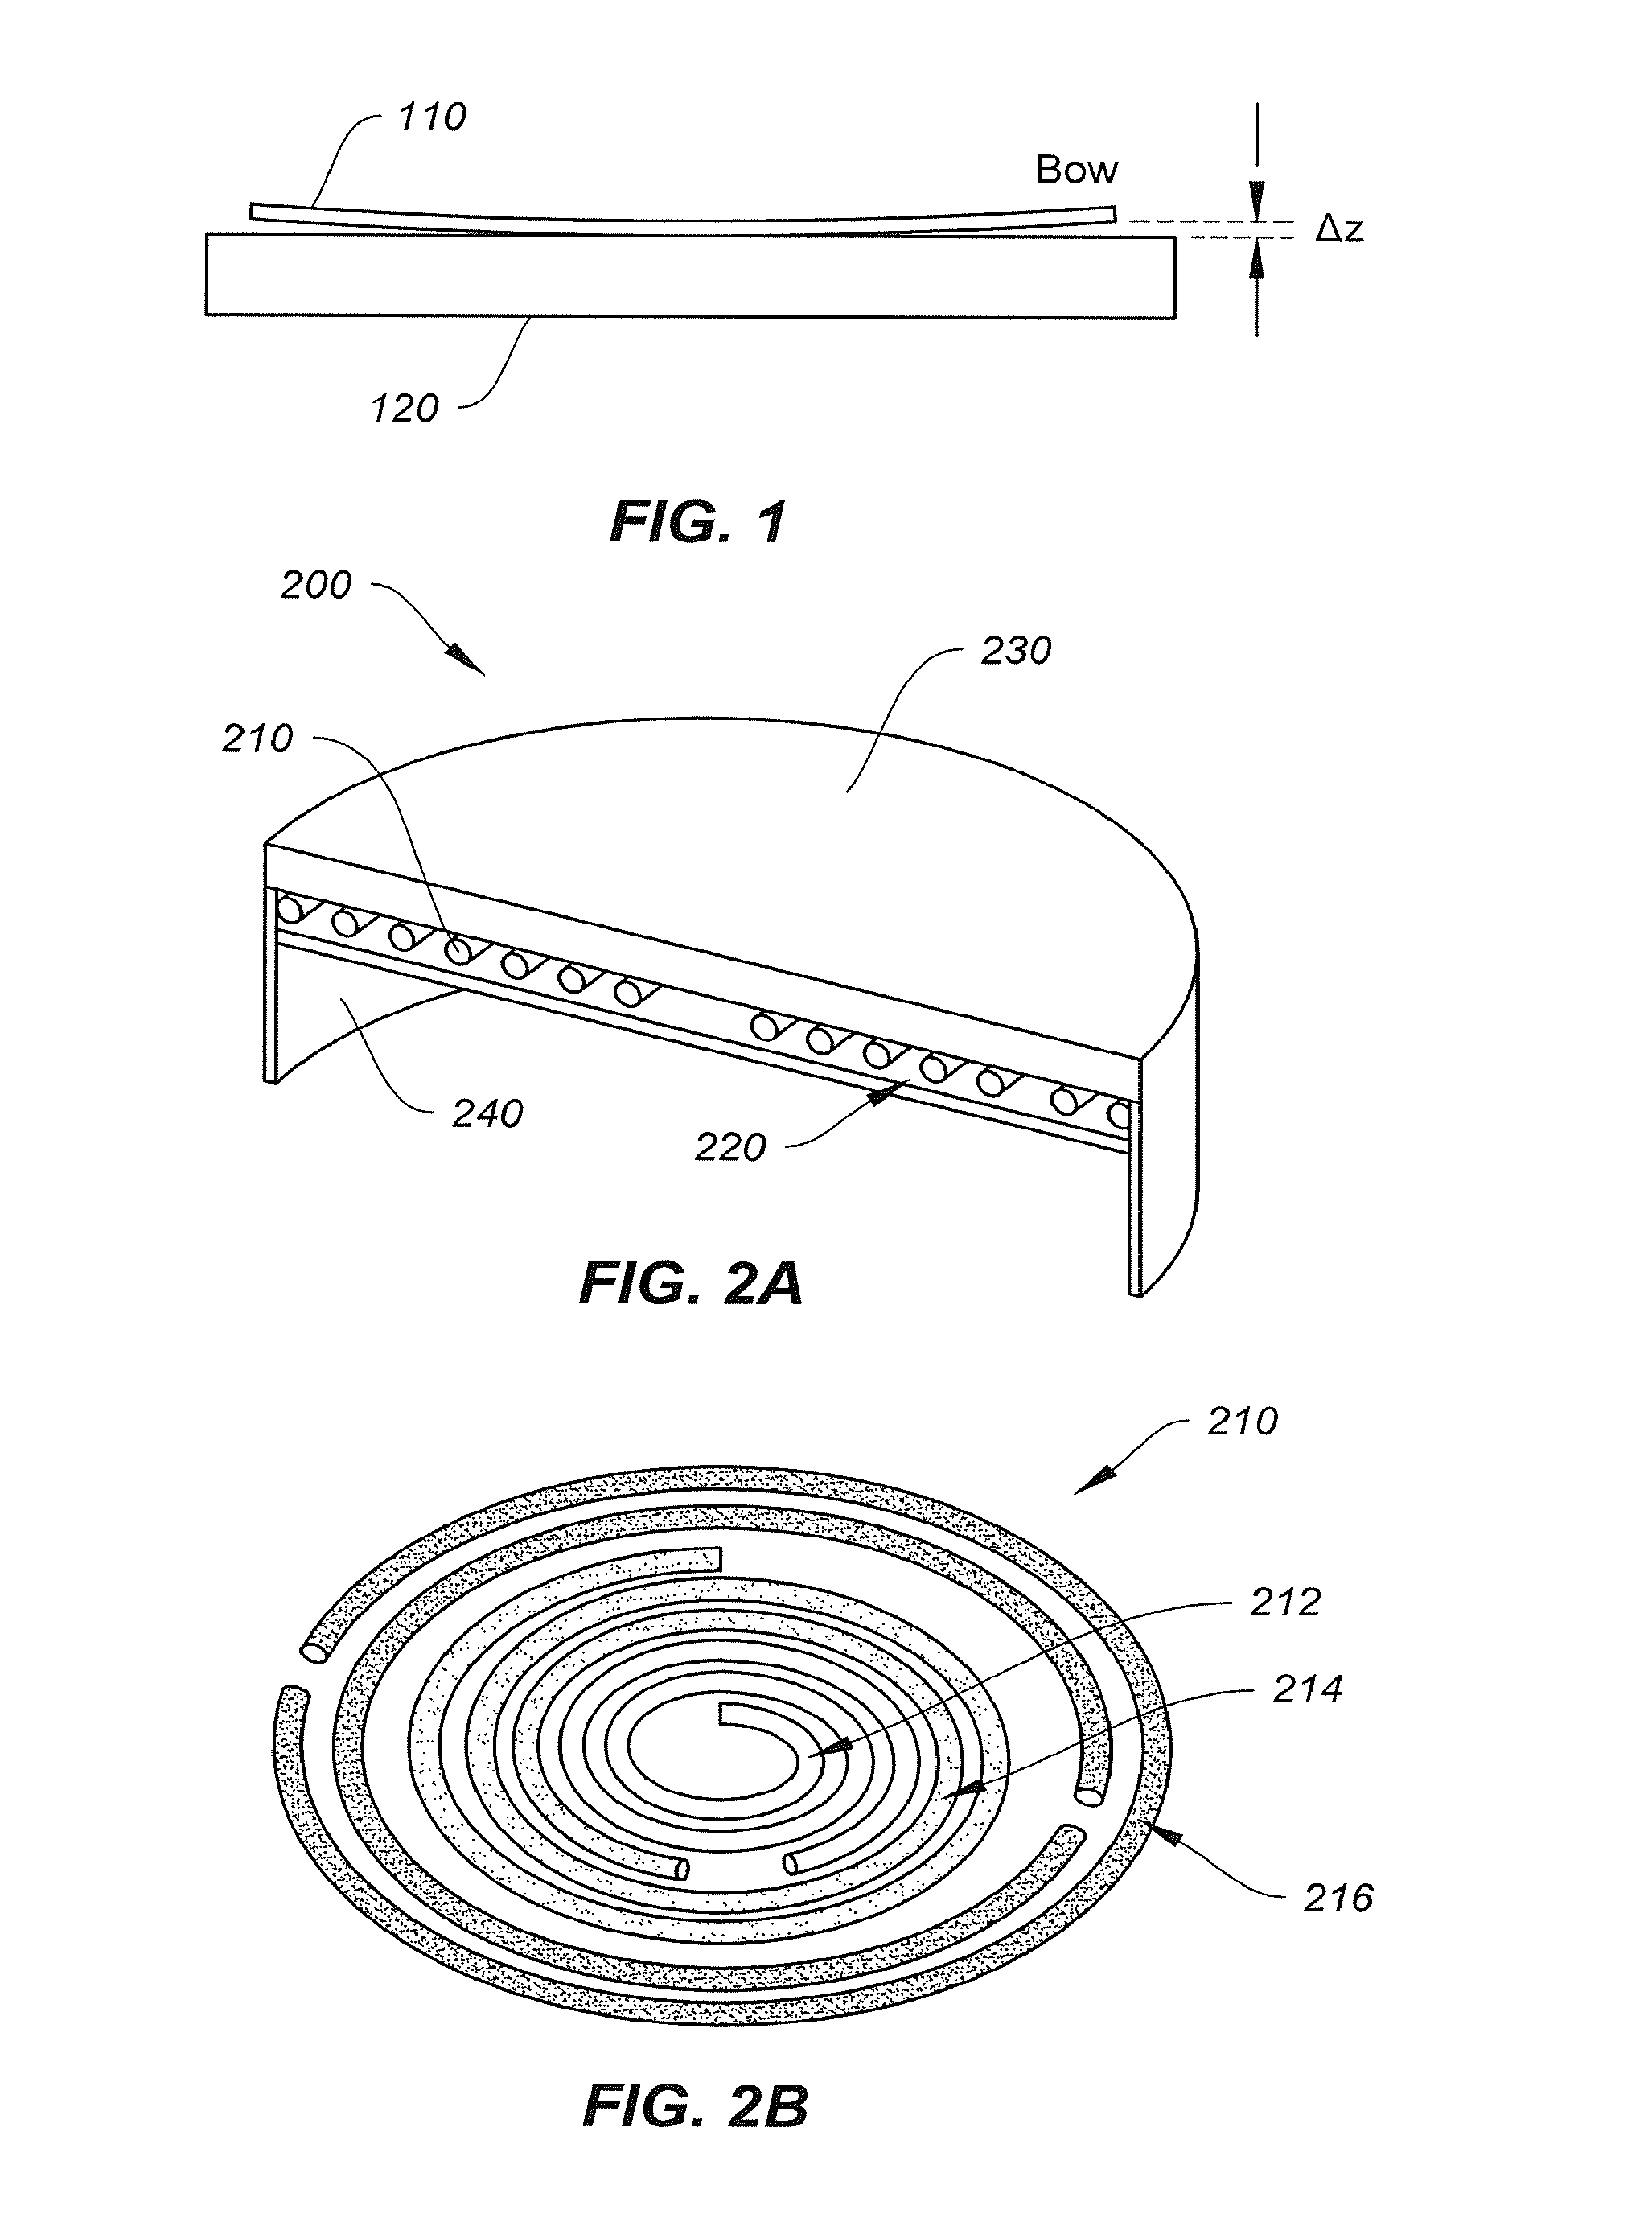 Heating systems for thin film formation